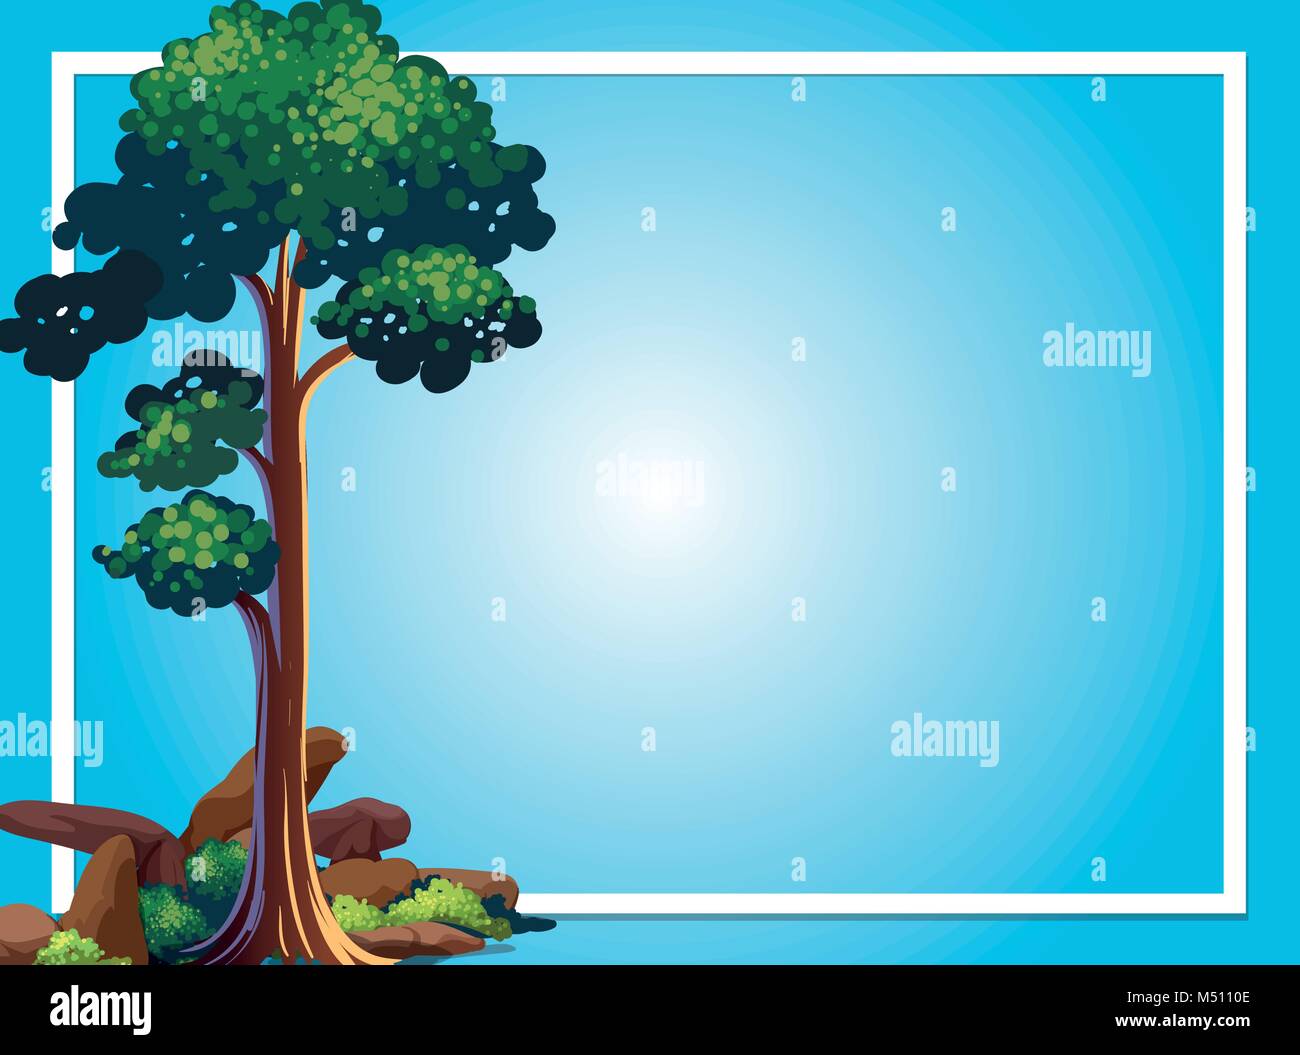 Frame template with green tree illustration Stock Vector